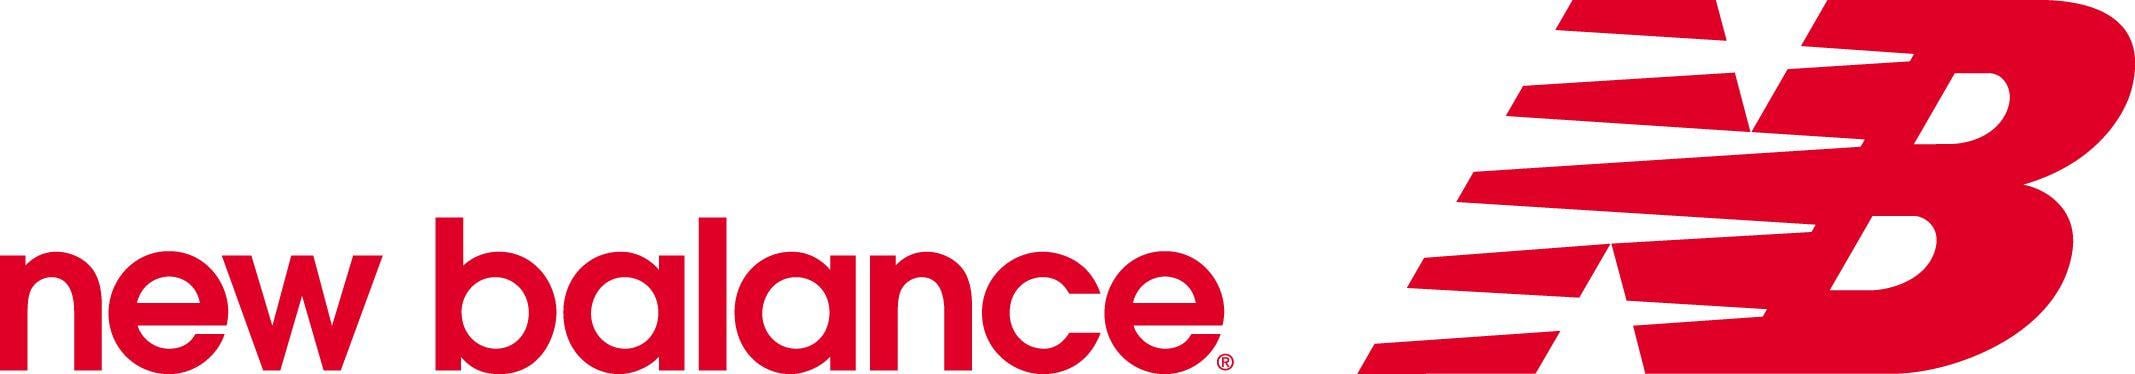 New Balance Logo - New Balance Shoes and Clothing online for men and women. Cheap